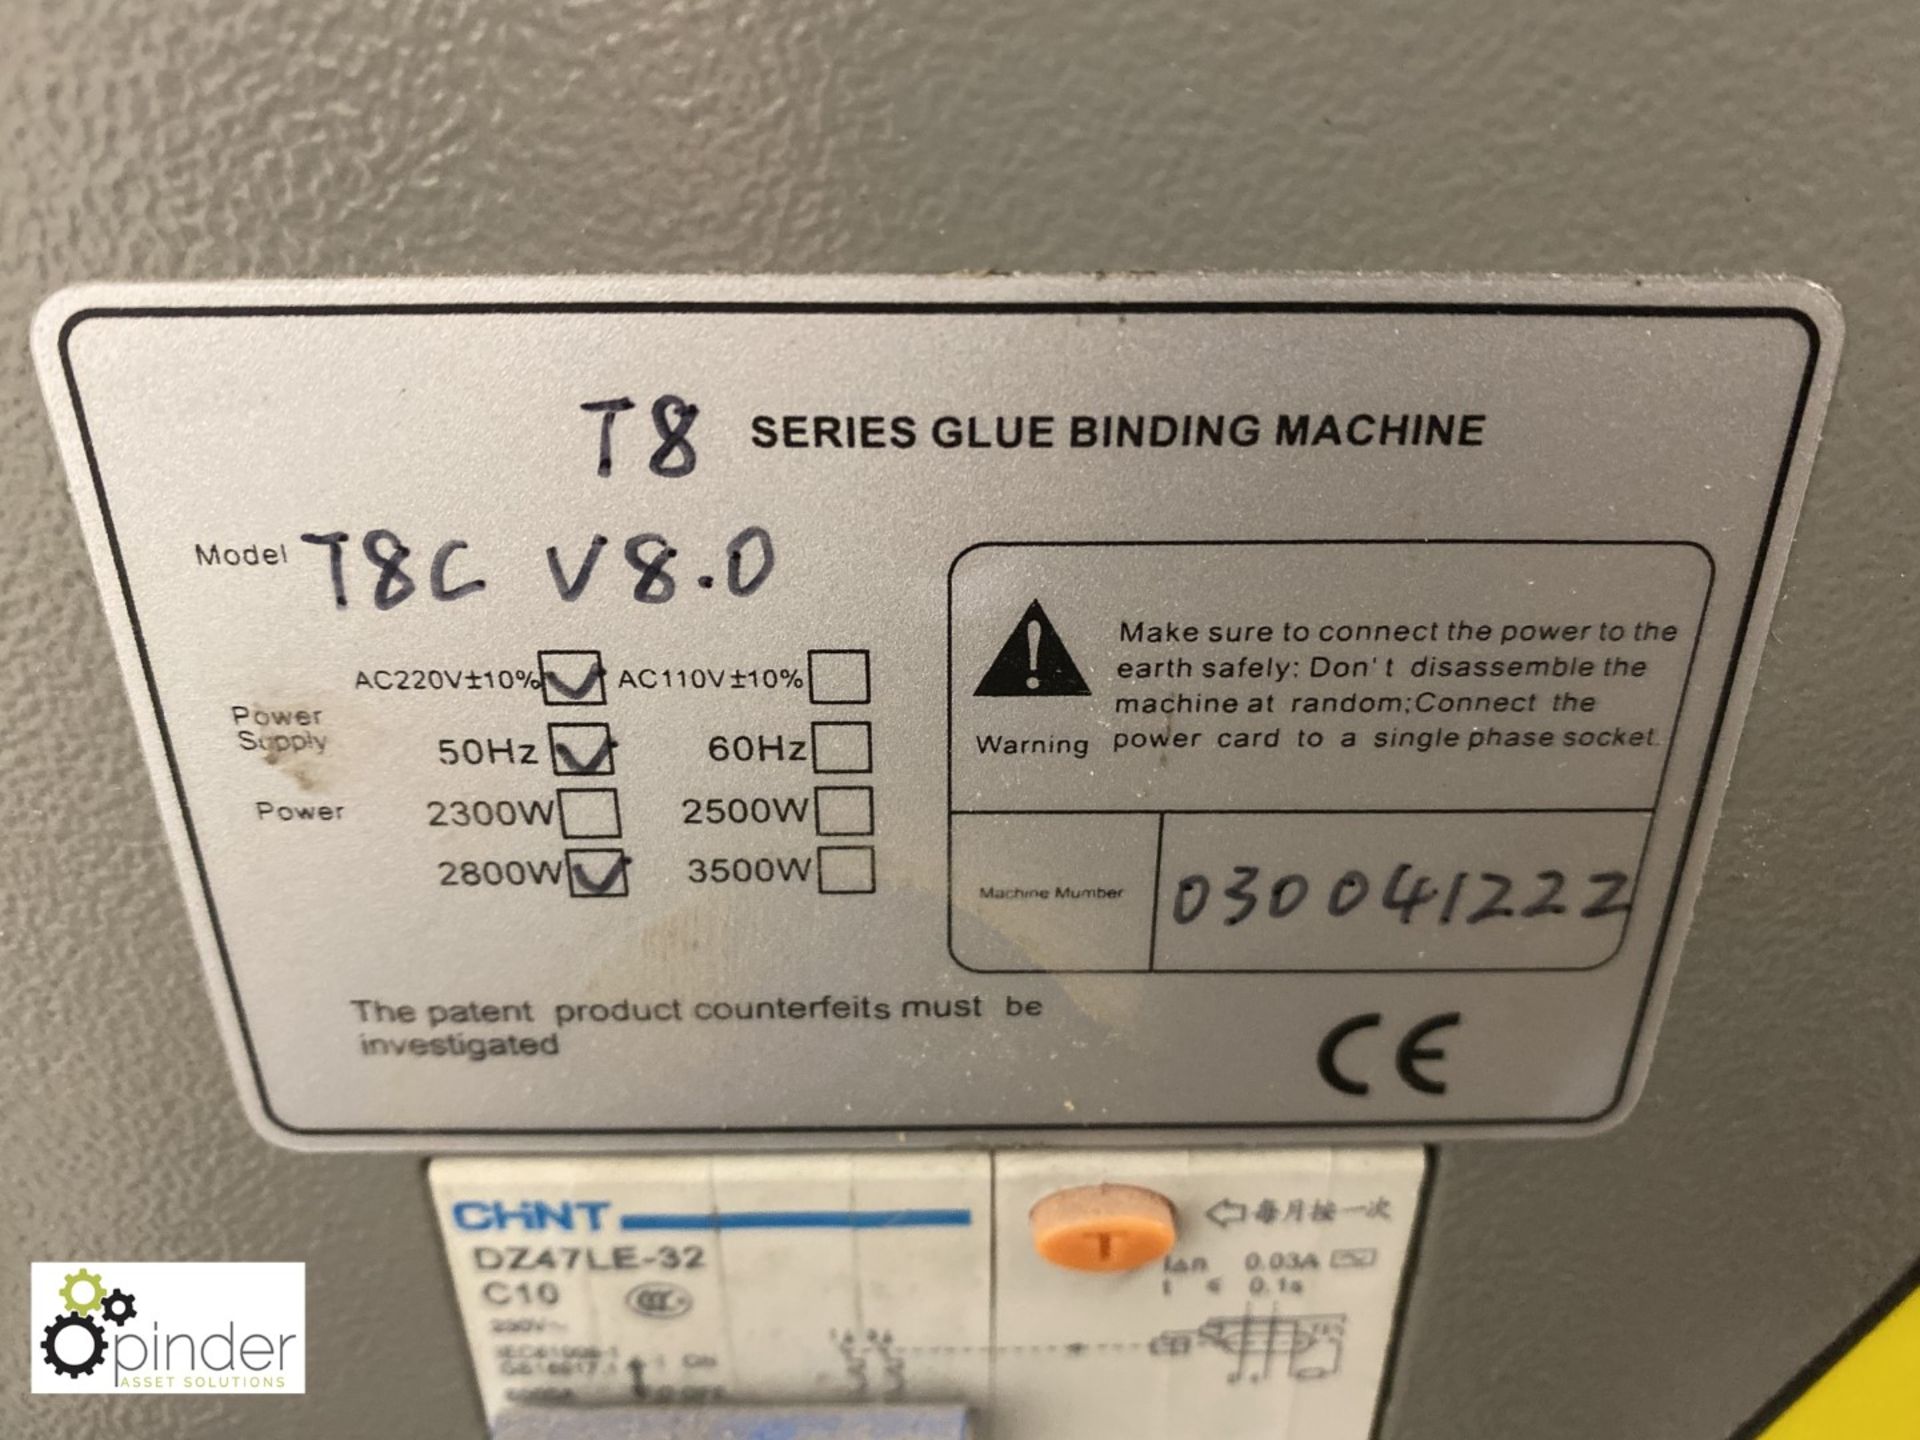 T8C V8.0 Glue Binding Machine, 240volts (this lot is located in Penistone) - Image 5 of 8